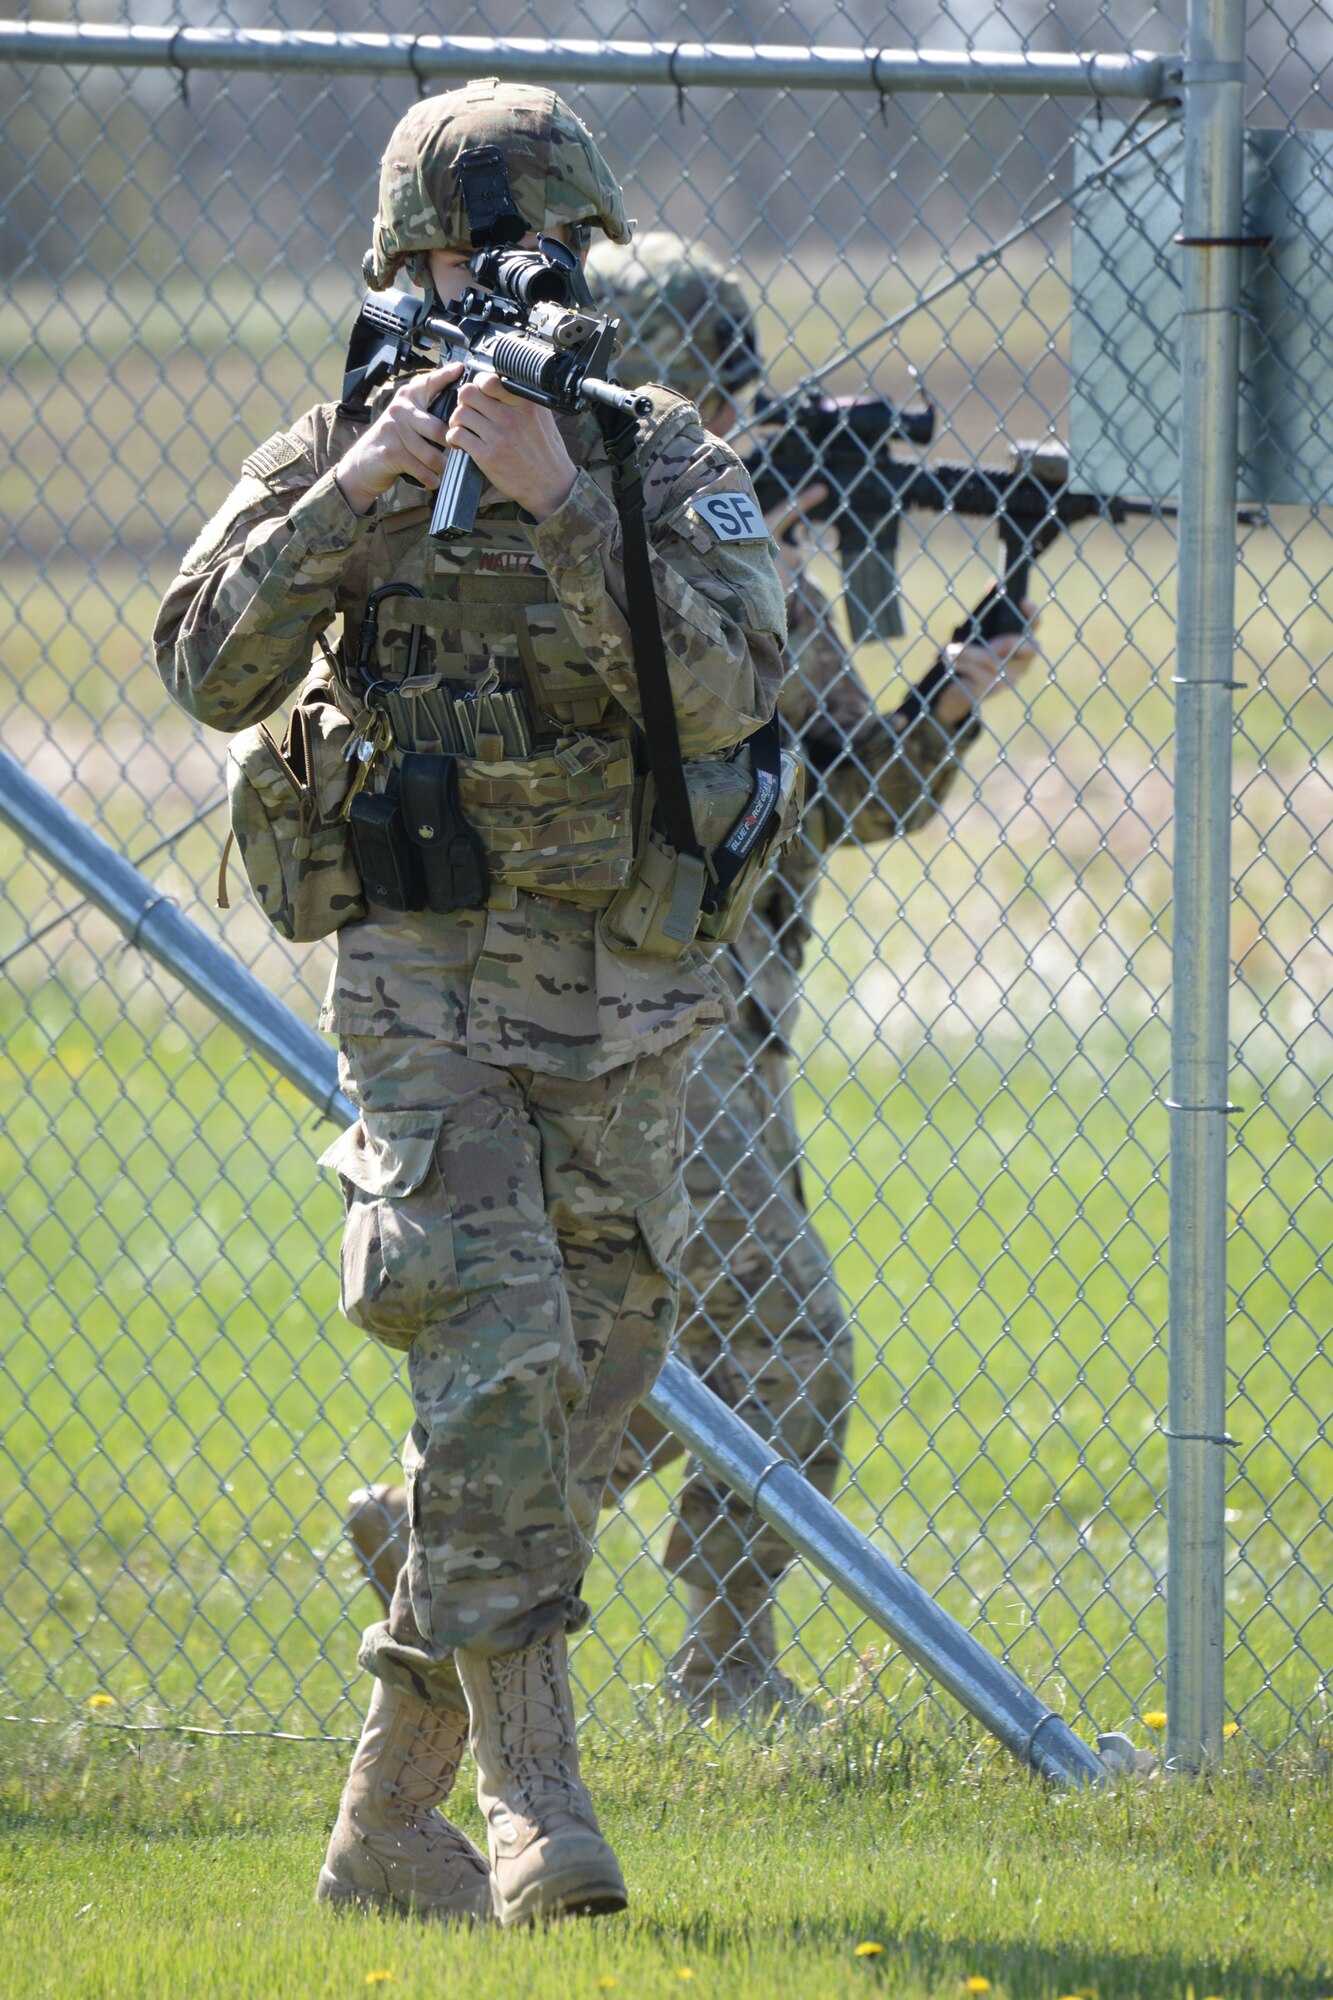 From left to right 219 Security Forces Squadron members Senior Airman Tyler Waltz and Airman 1st Class Alex Pauling conduct an area sweep of a Minot Air Force Base missile alert facility May 21, 2015, near Minot, North Dakota. Sweeps are routinely done for training, as a result of an alarm being set off, or periodically because time has passed between sweeps. The North Dakota Air National Guard members are doing their annual training period as they perform the real-World mission of missile field security, and train for their war-time tasking mission. The Air National Guard members are routinely integrated among the U.S. Air Force active duty personnel performing missile field security in a seamless and indistinguishable manner. (U.S. Air National Guard photo by Senior Master Sgt. David H. Lipp/Released)